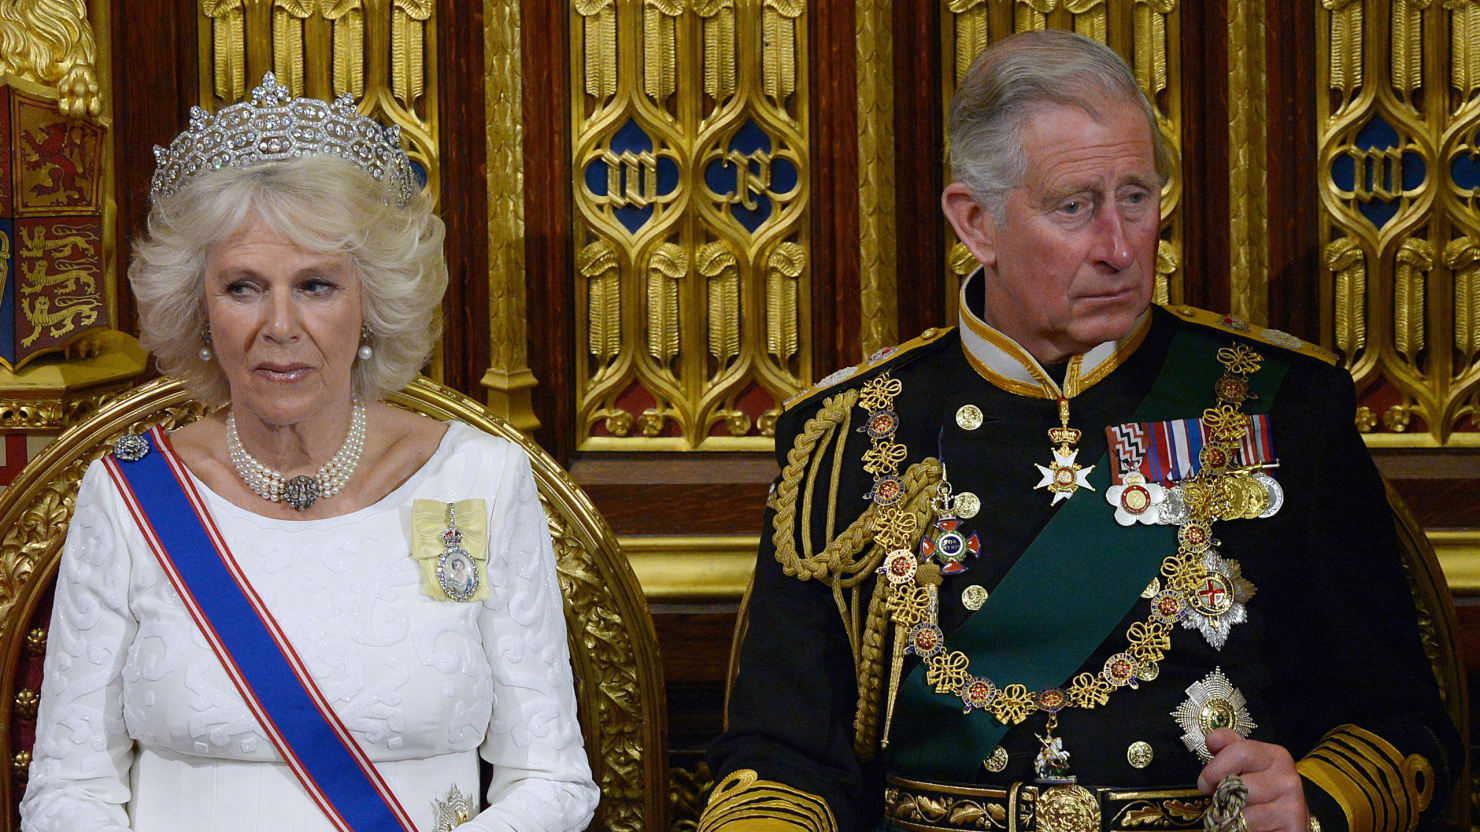 Imagining Prince Charles as King Makes All of Britain Wish ...